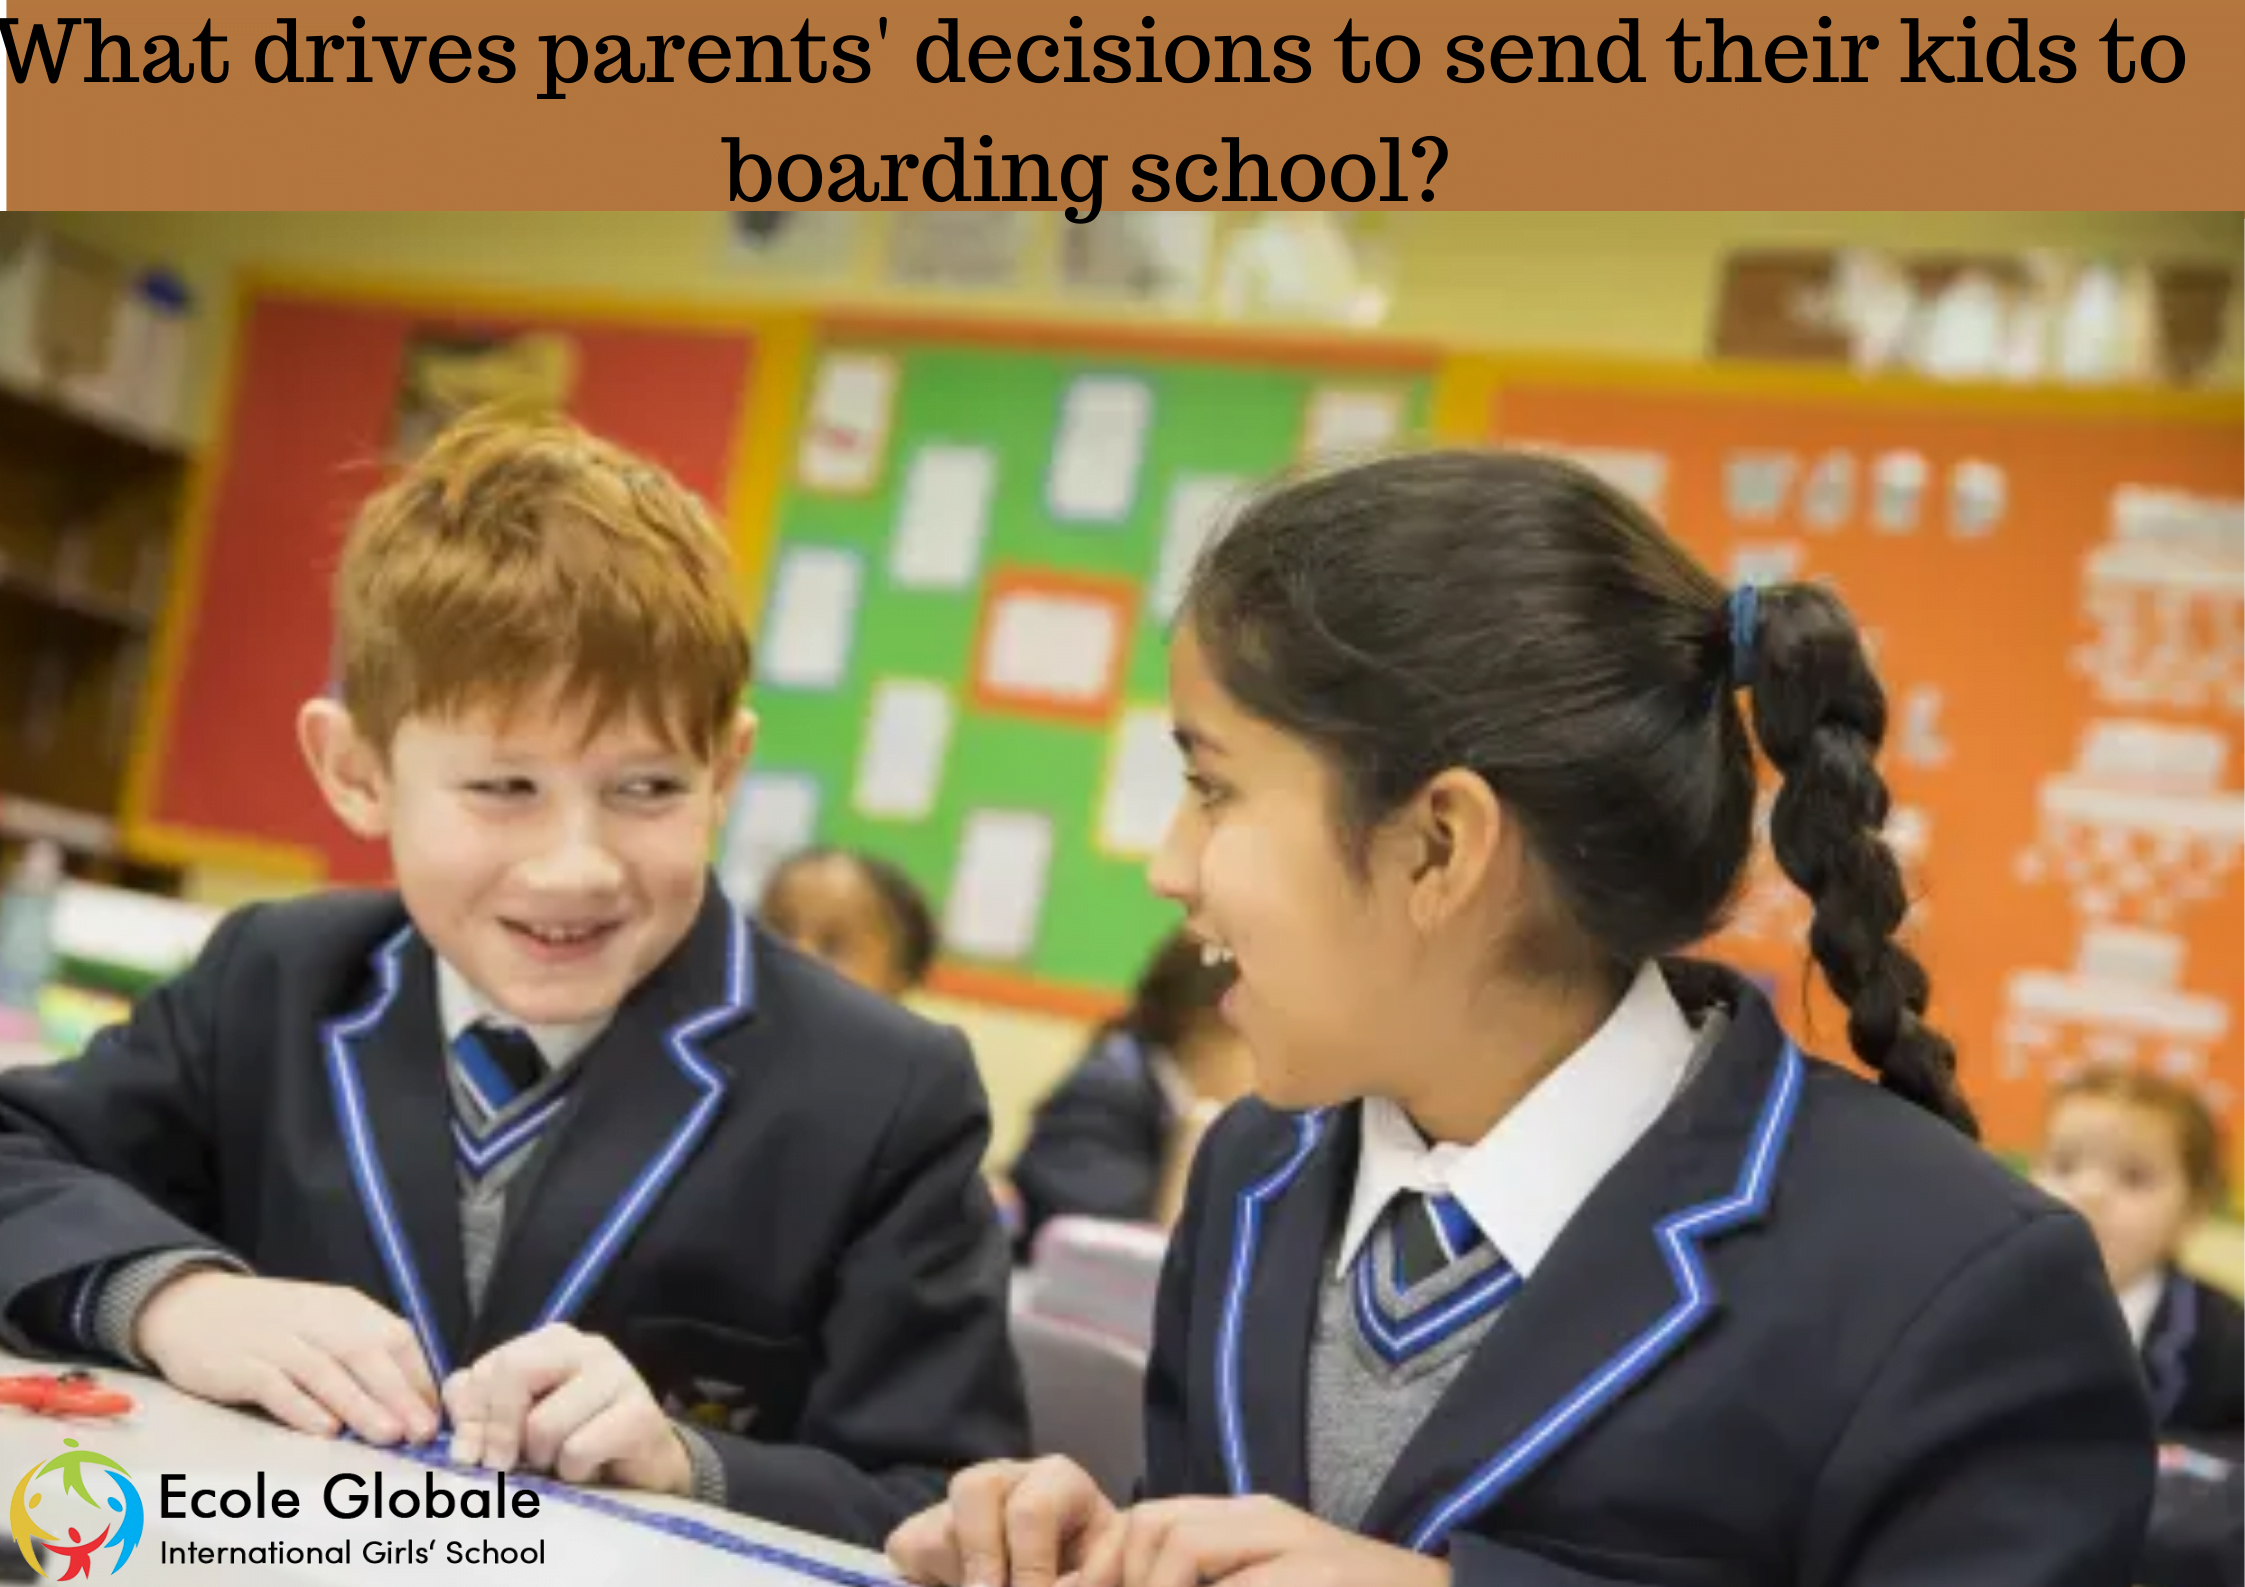 What drives parents’ decisions to send their kids to boarding school?